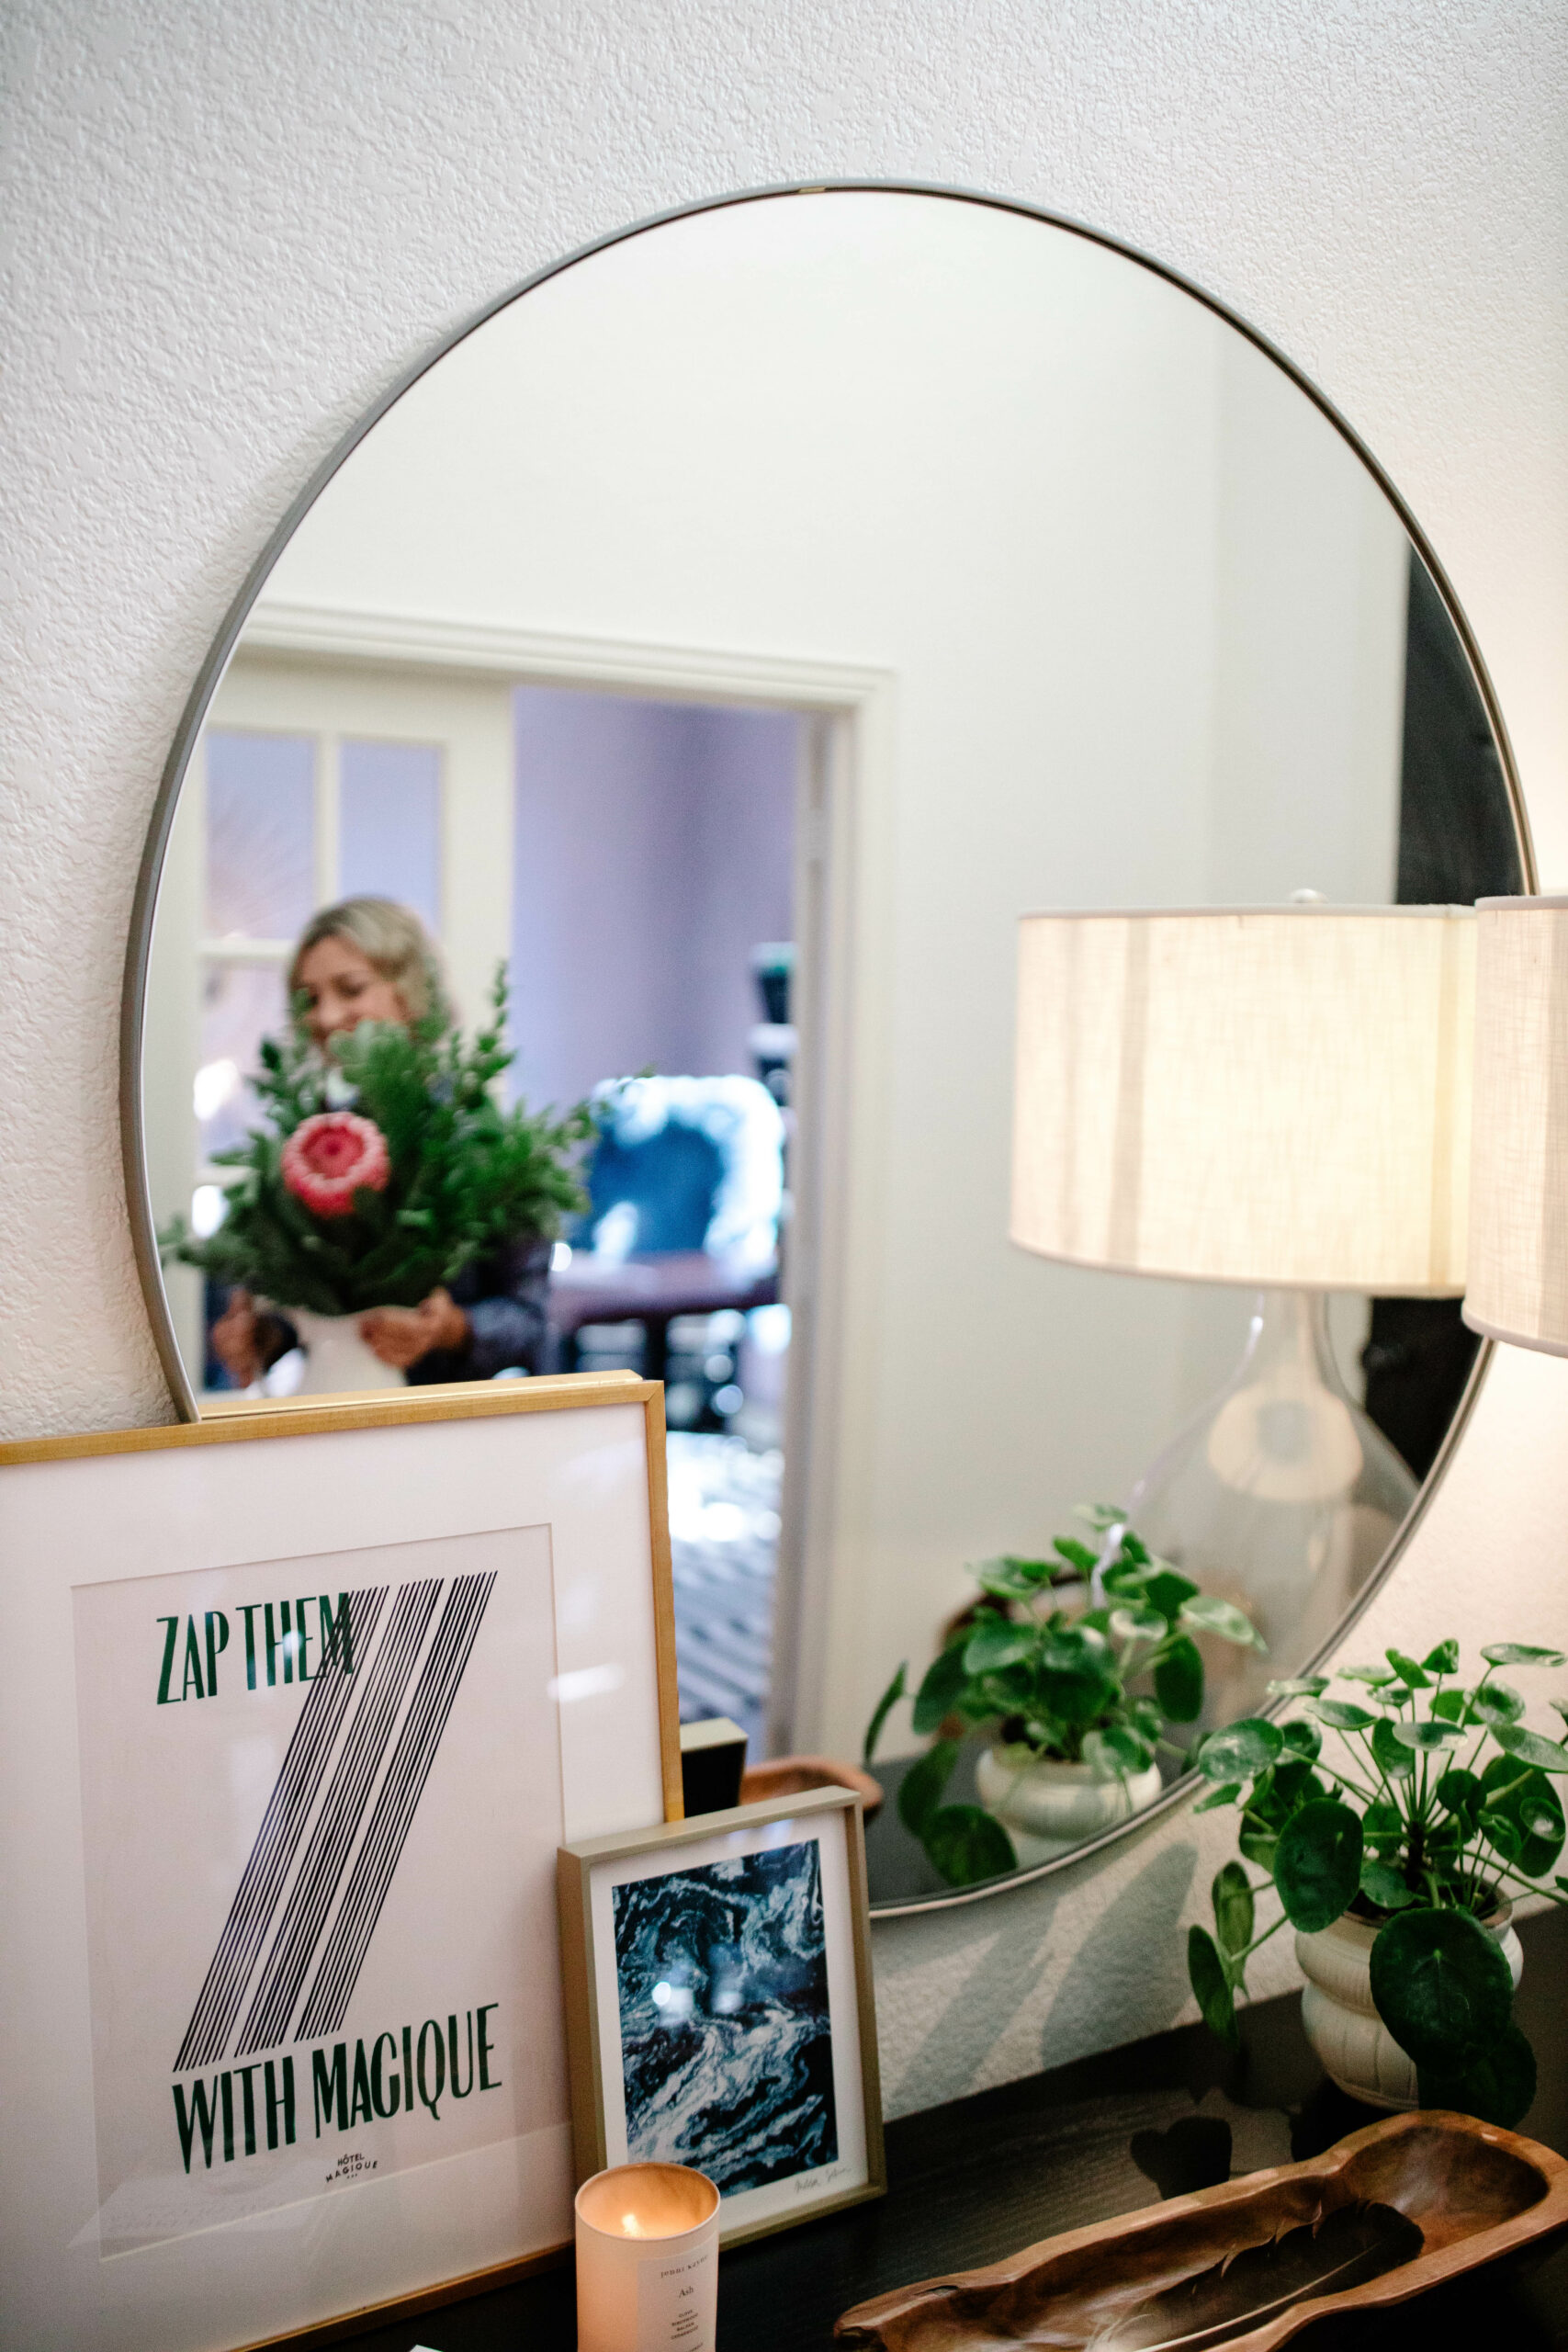 Q & A: could you explain the do and don’ts of mirrors?